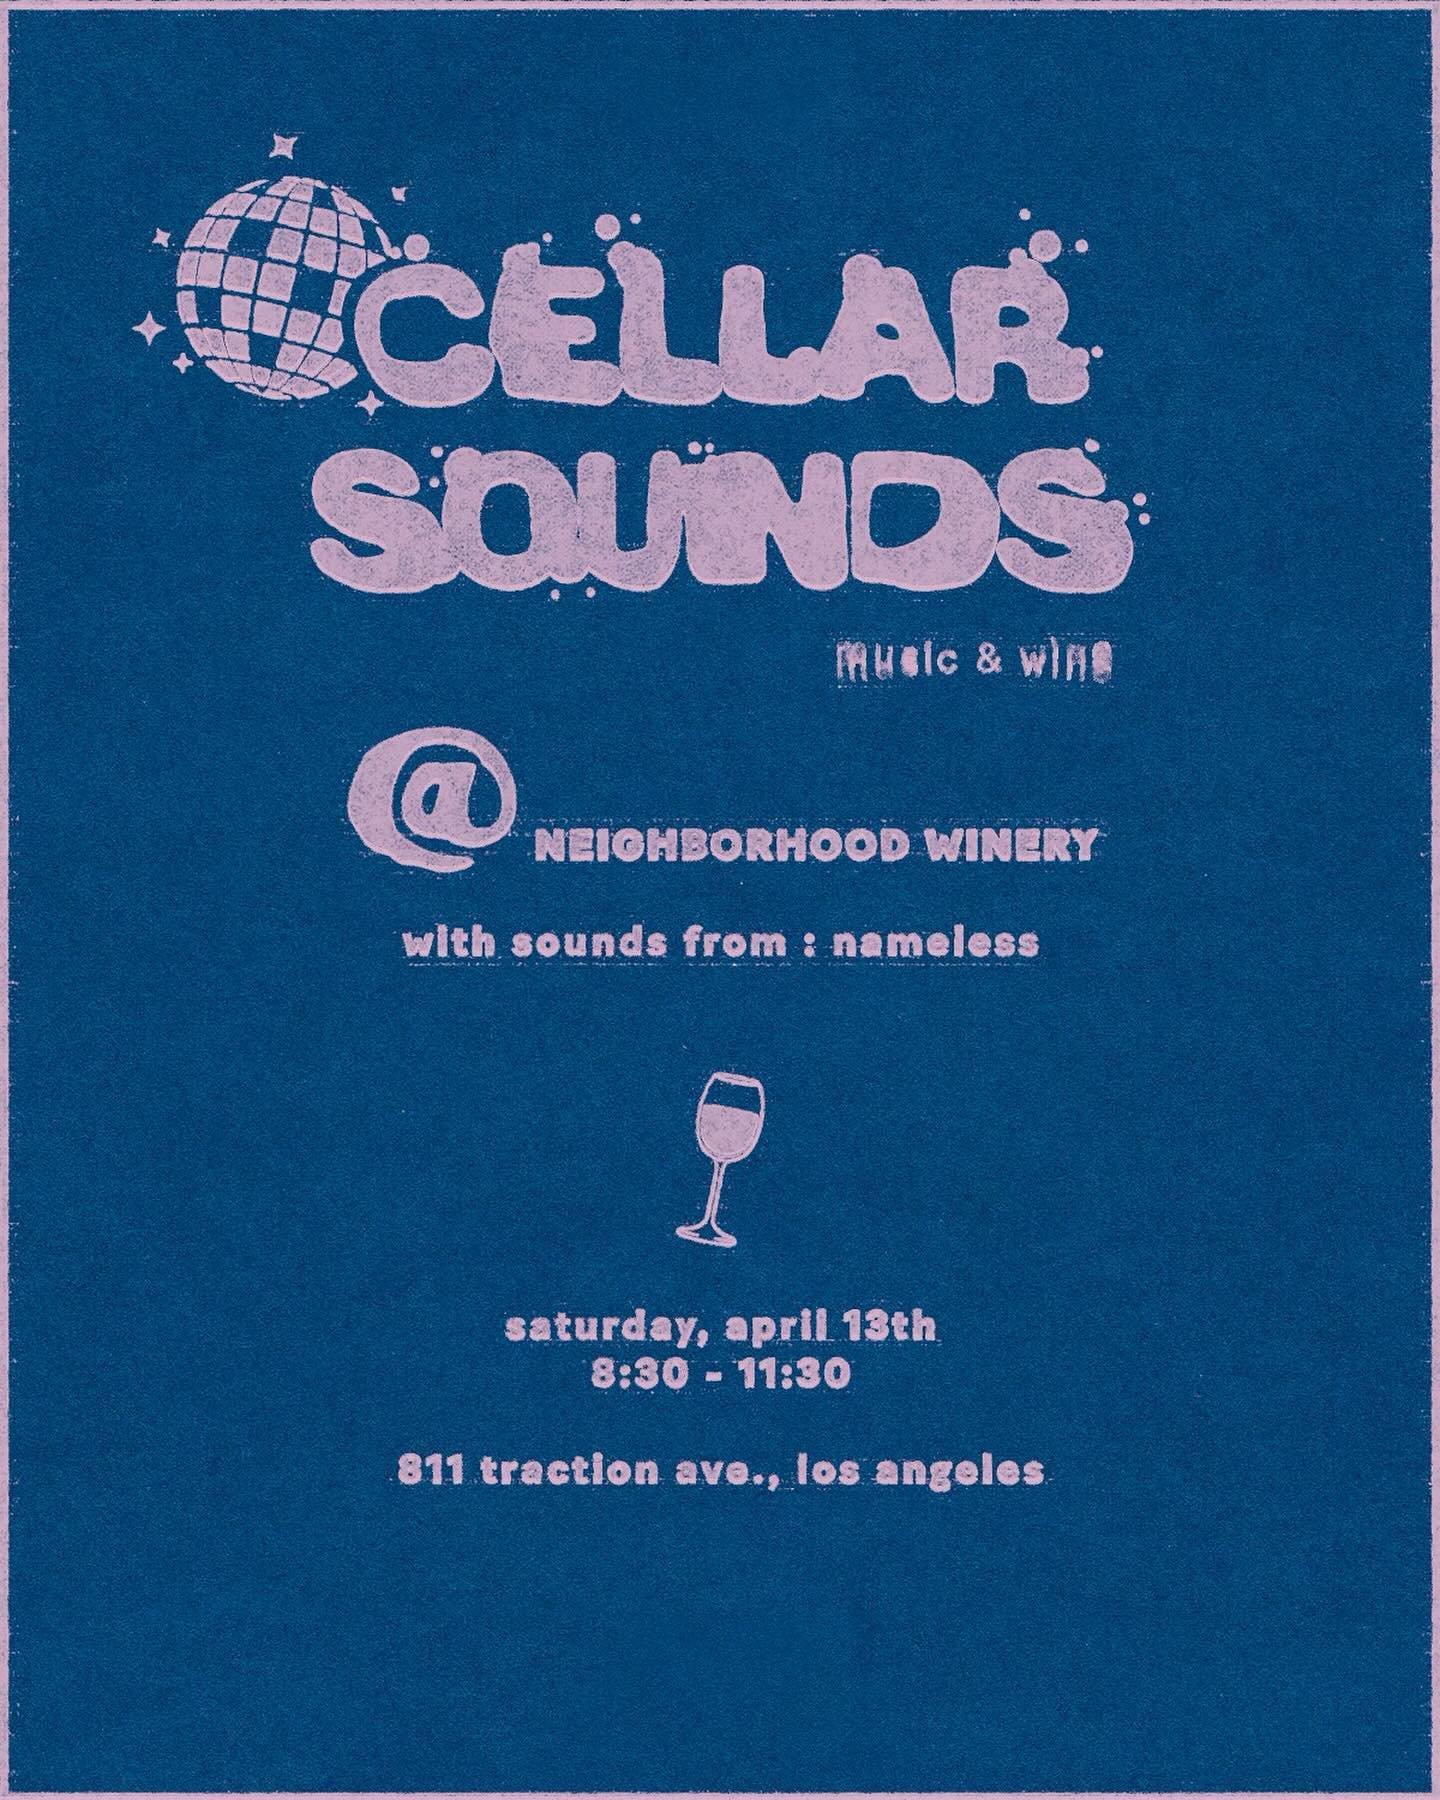 Love is real! Music and Wine and Party. Cellar Sounds with @nl.issue tomorrow. 8:30-11:30. Wine, music, a party!